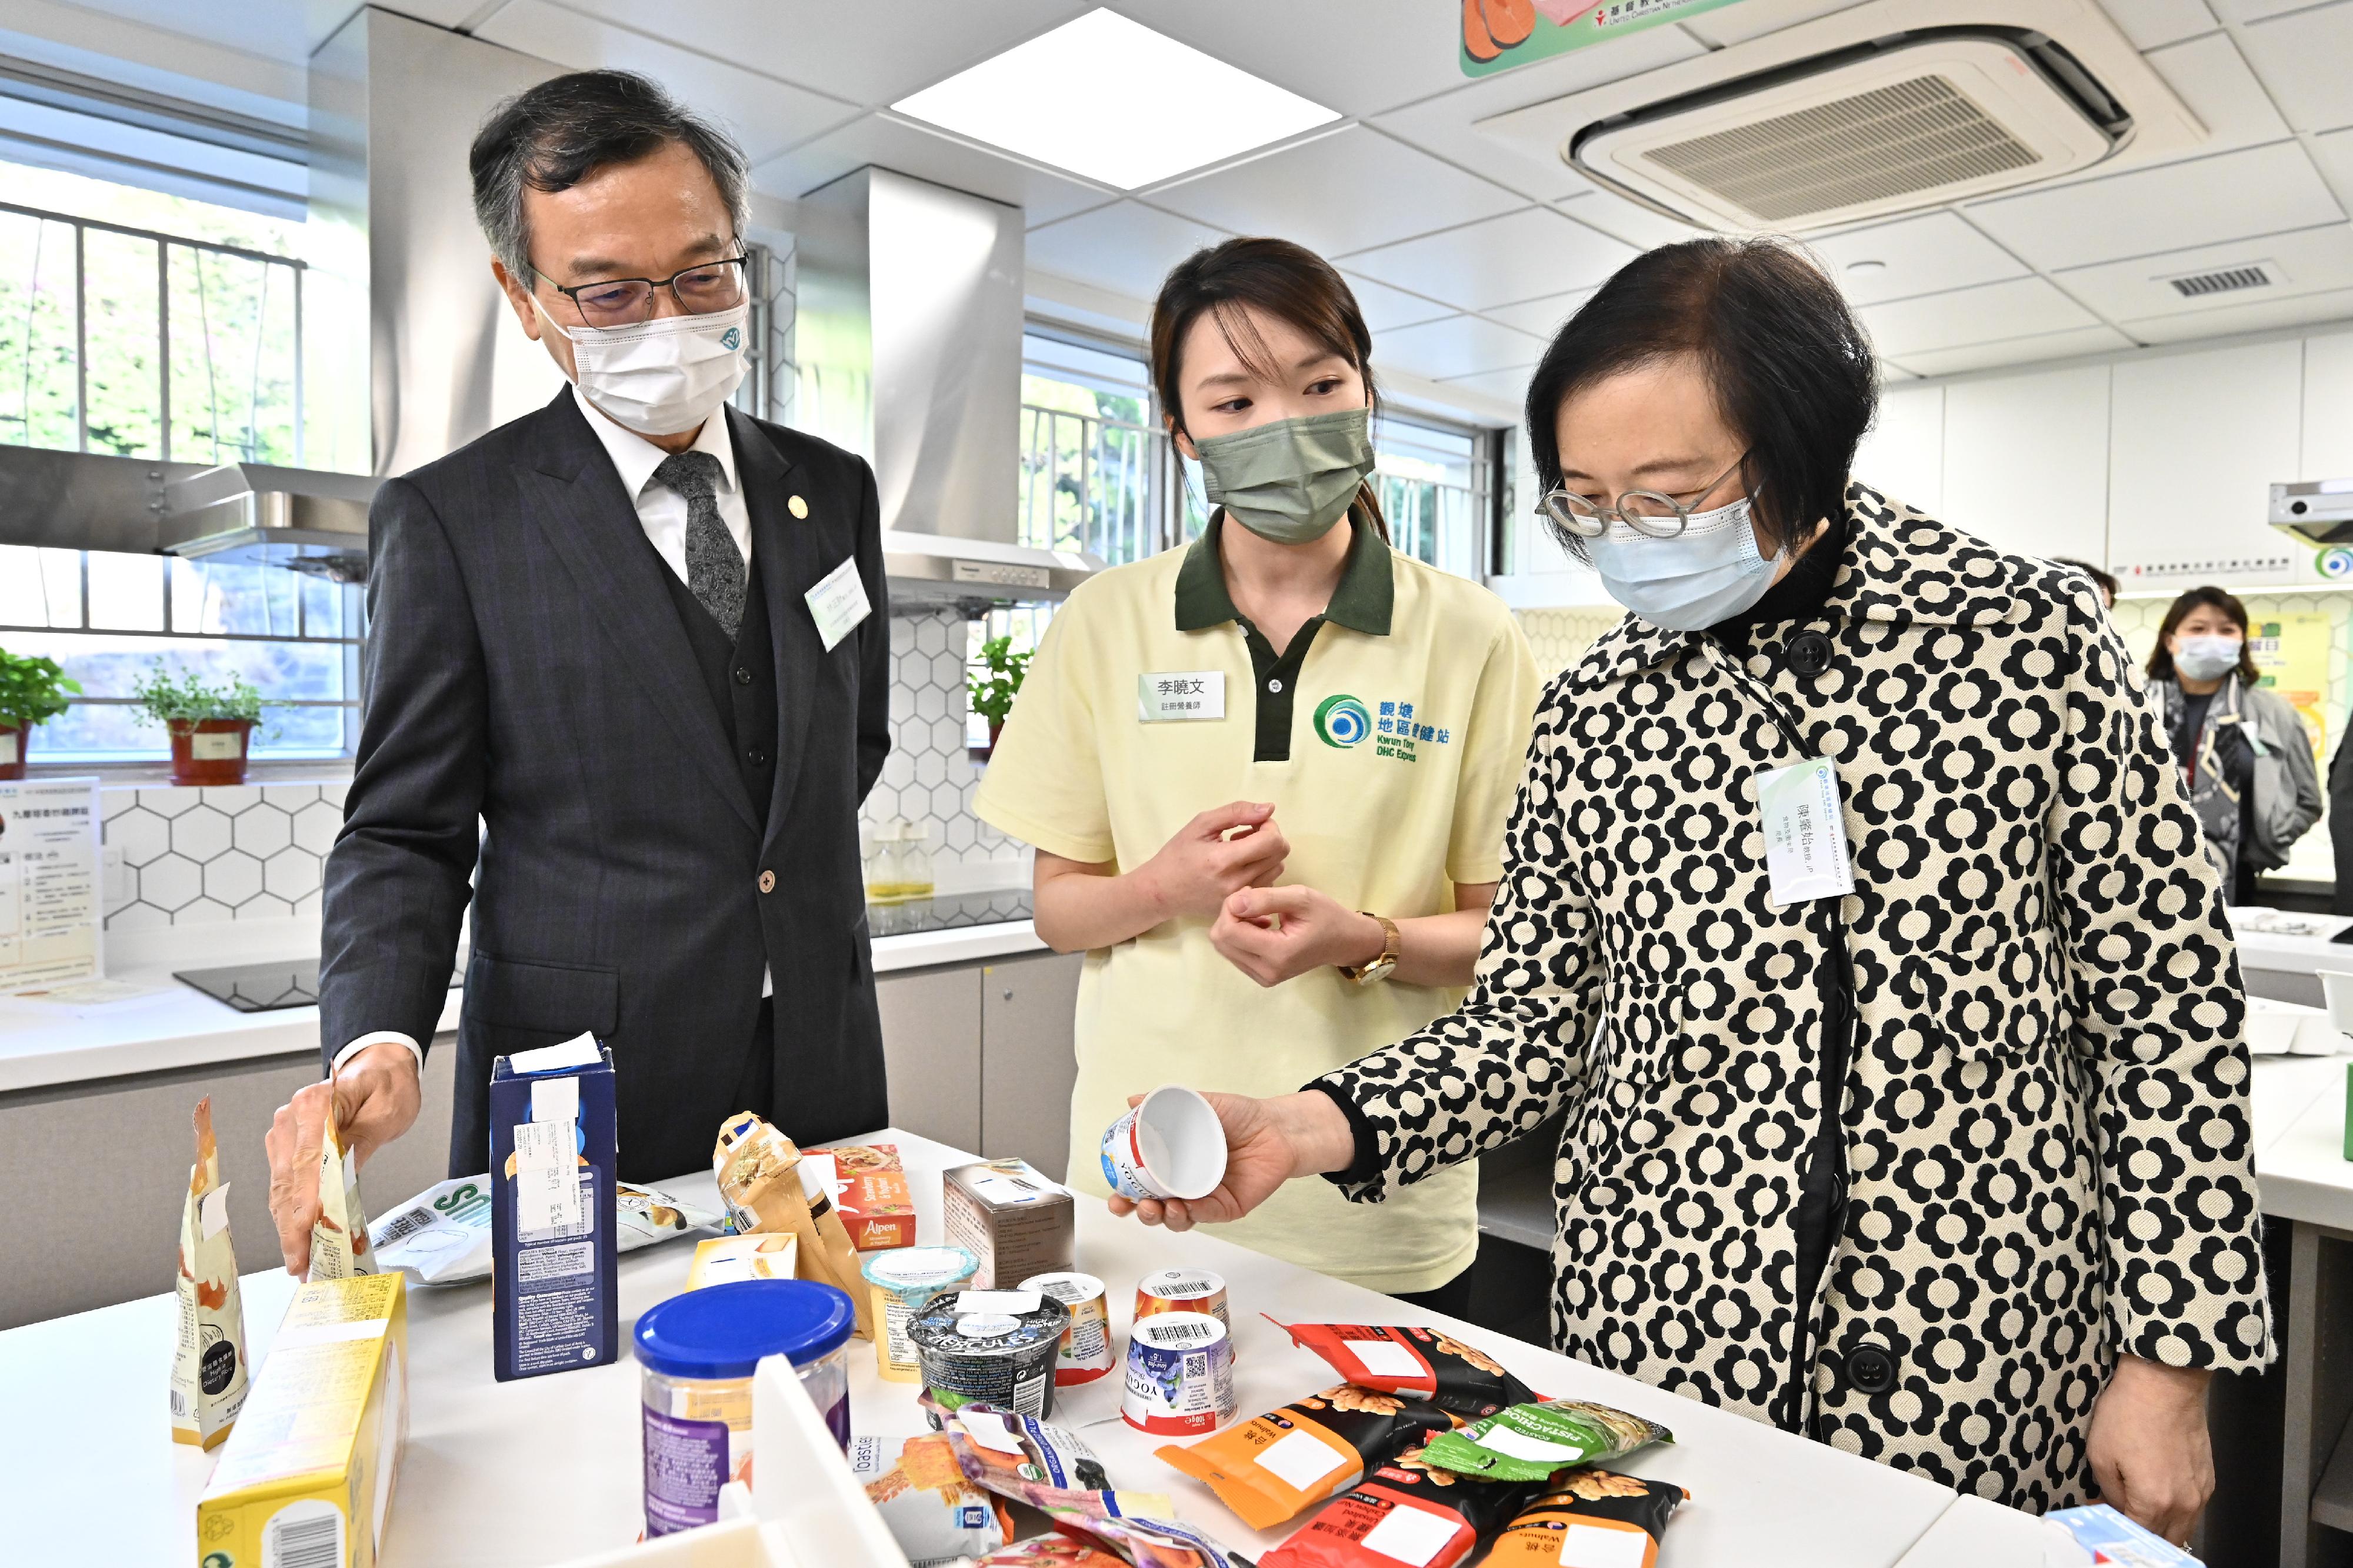 The Secretary for Food and Health, Professor Sophia Chan, officiated at the opening ceremony of the Kwun Tong District Health Centre Express (DHC Express) today (December 6). Photo shows Professor Chan (right) and group convenor of the Steering Committee on Primary Healthcare Development Dr Lam Ching-choi (left) visiting the nutrition kitchen of the DHC Express after the opening ceremony.